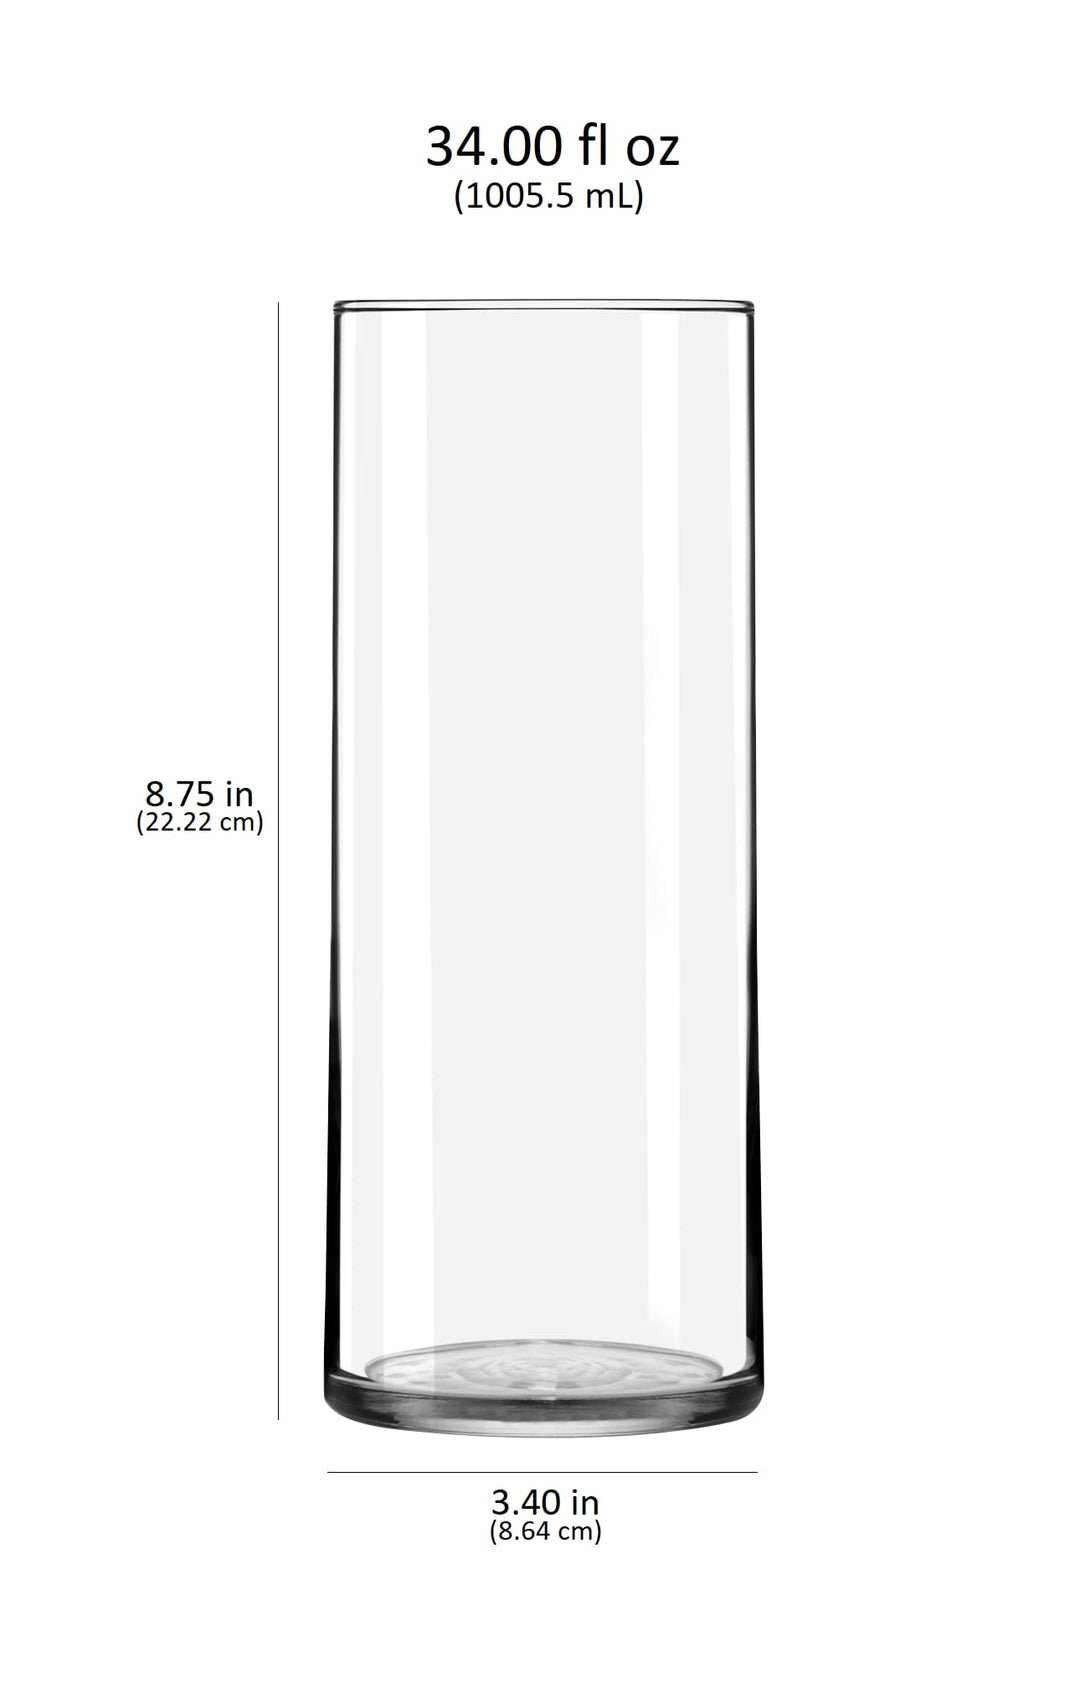 Includes 12, (8.75-inch tall x 3.4-inch wide) glass vases